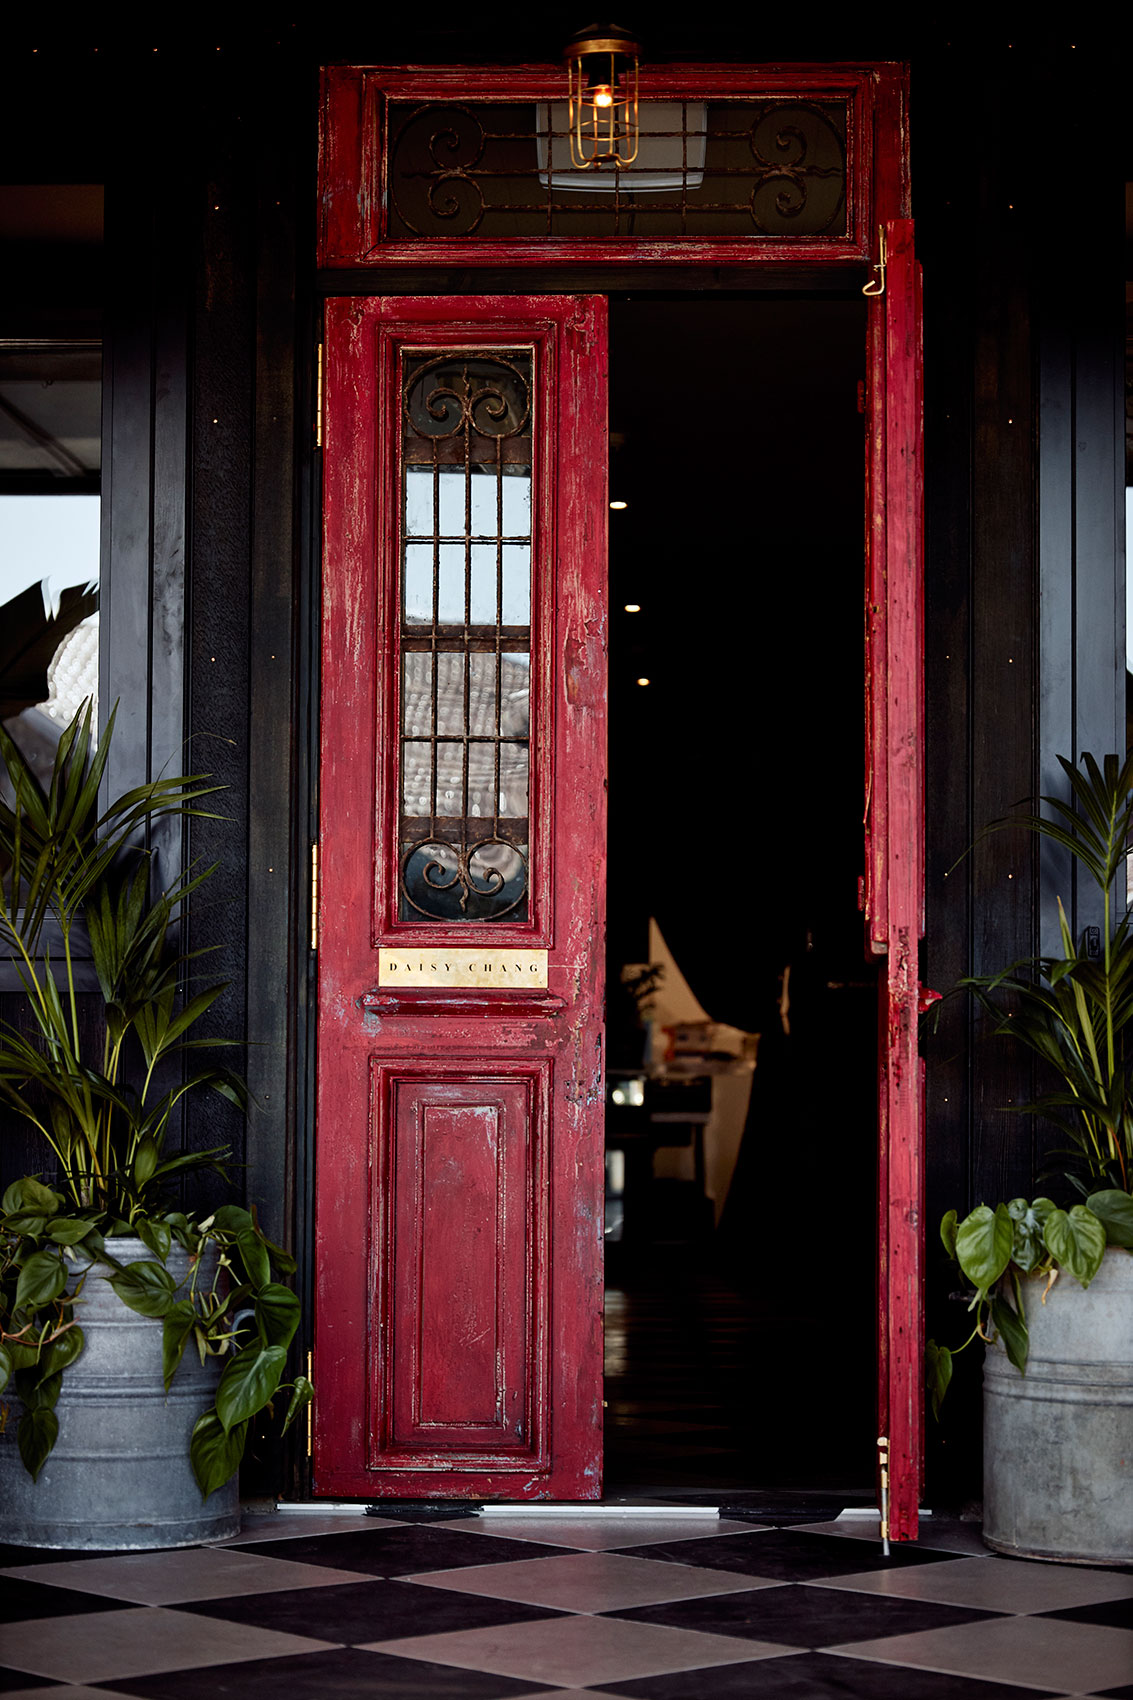 Daisy Chang Antique Red Door • Lifestyle & Documentary Photography